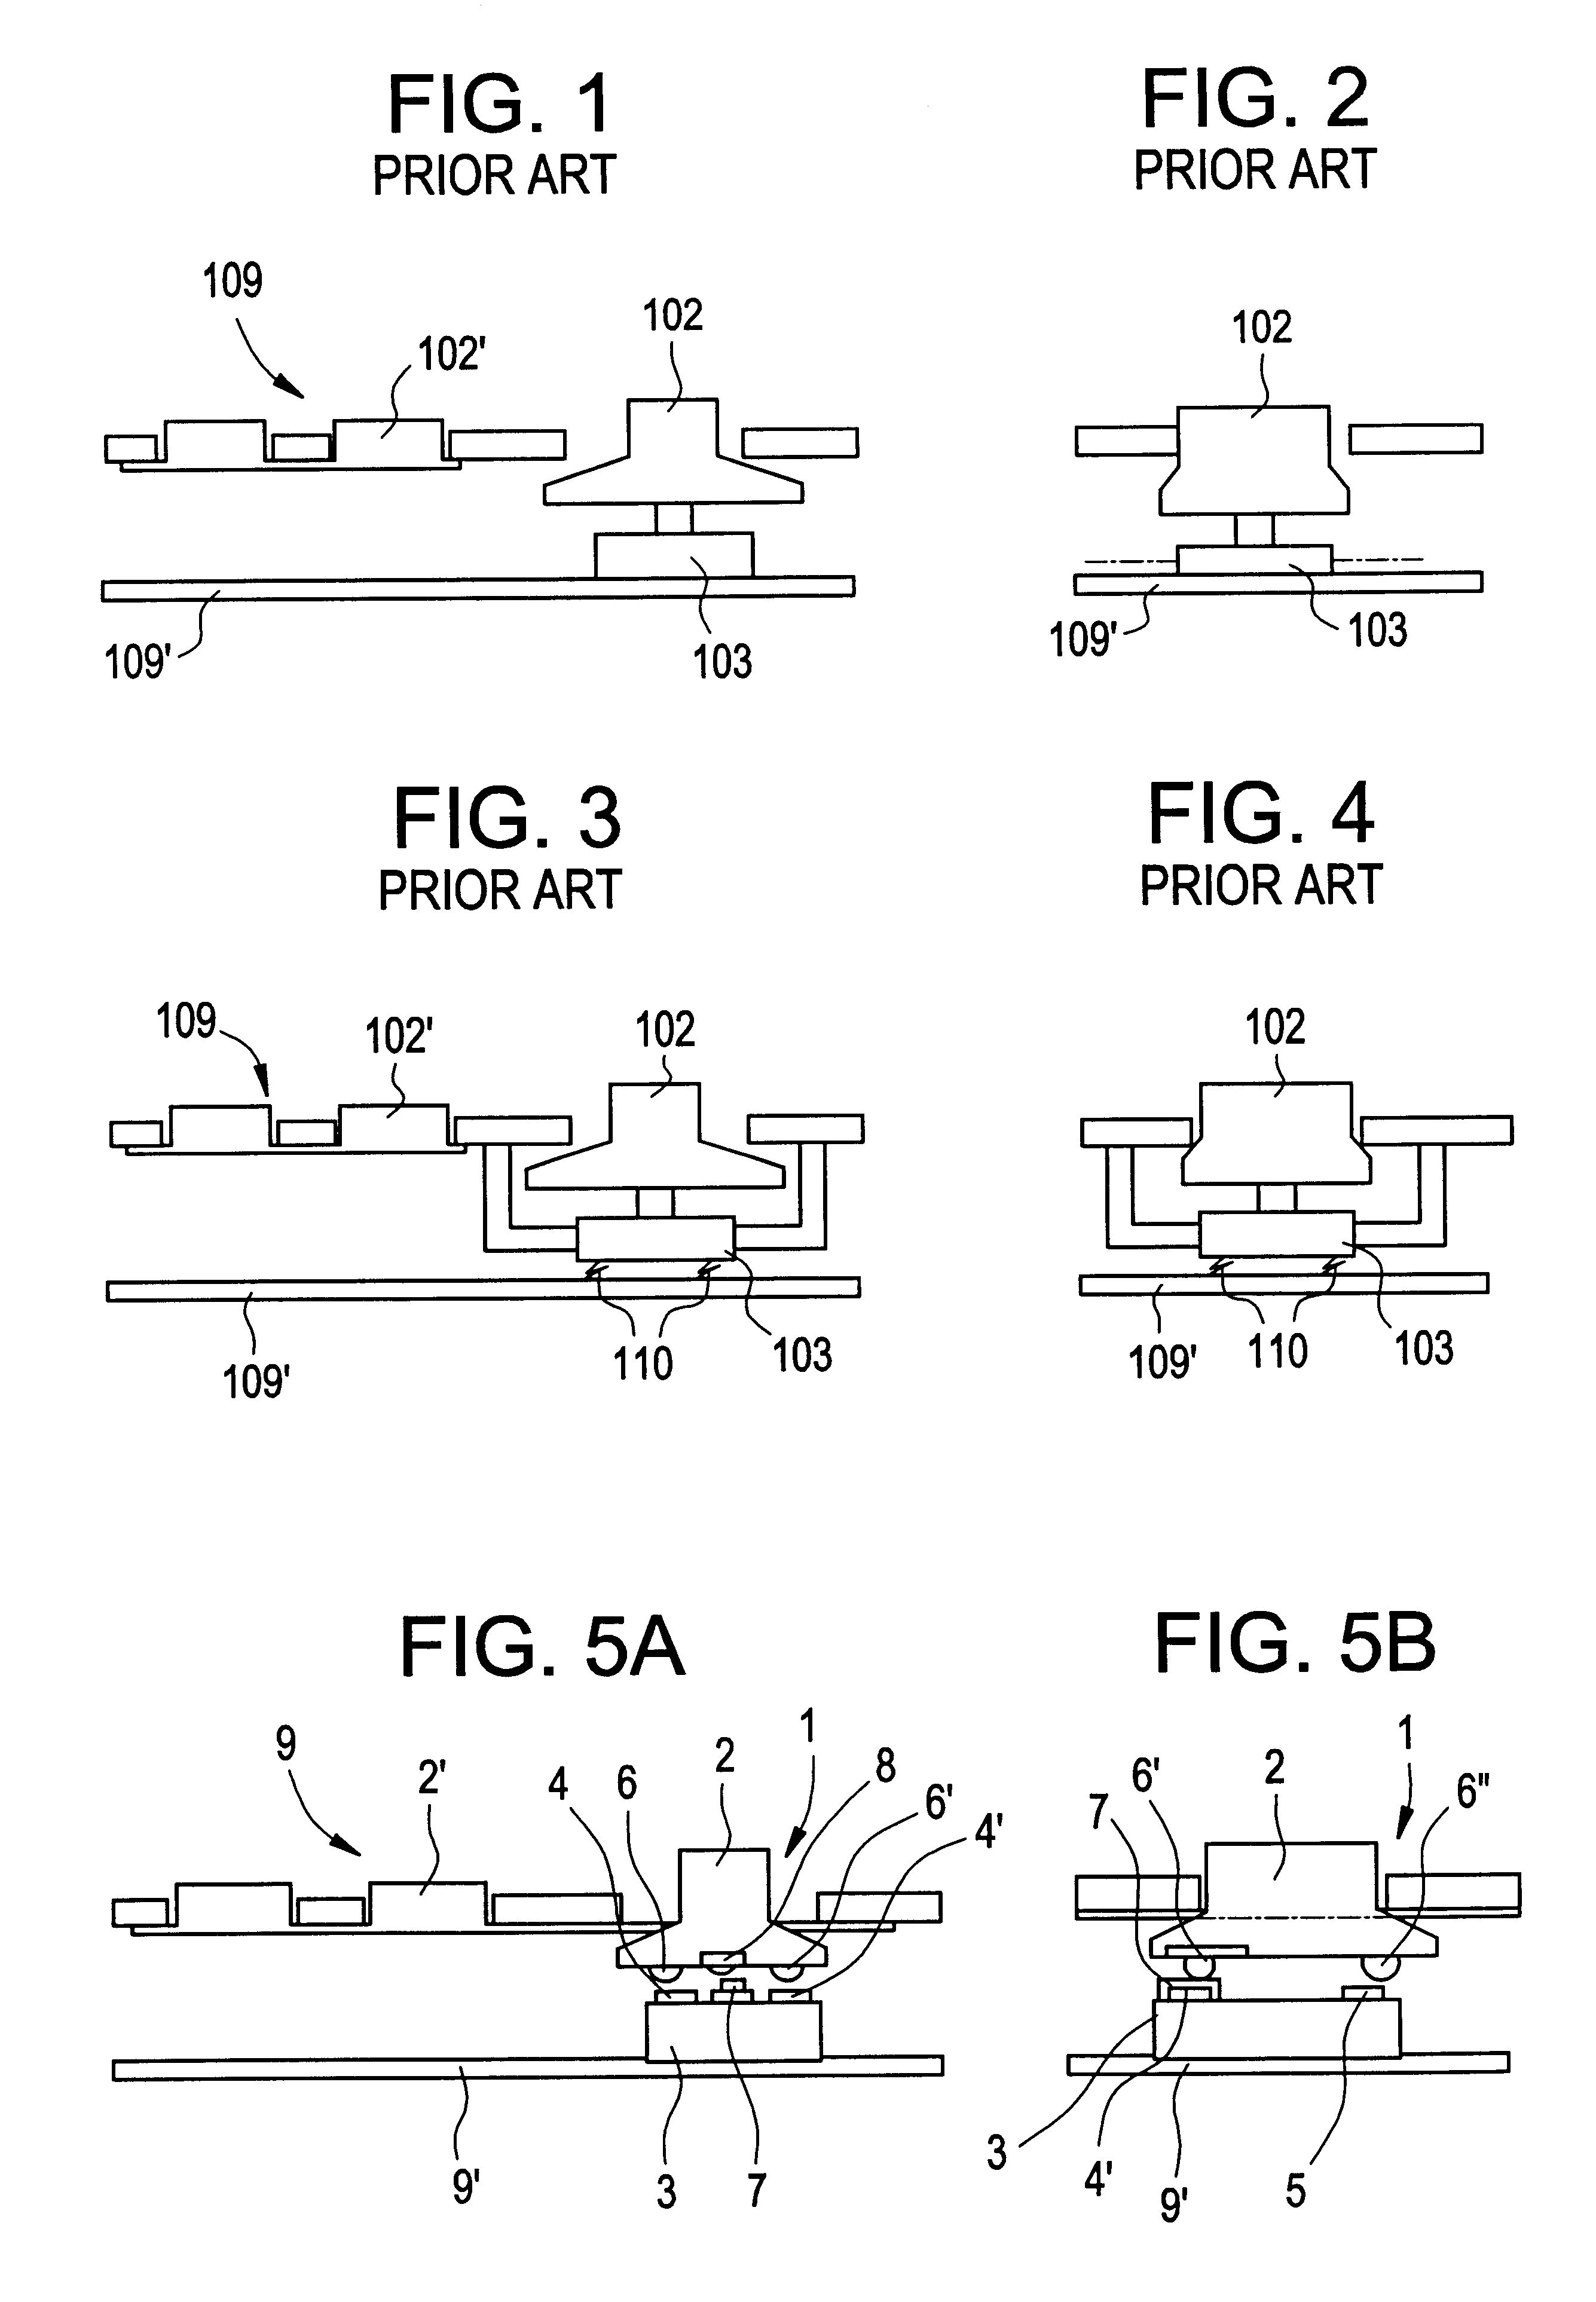 Keyboard switch assembly including actuator member with three active positions